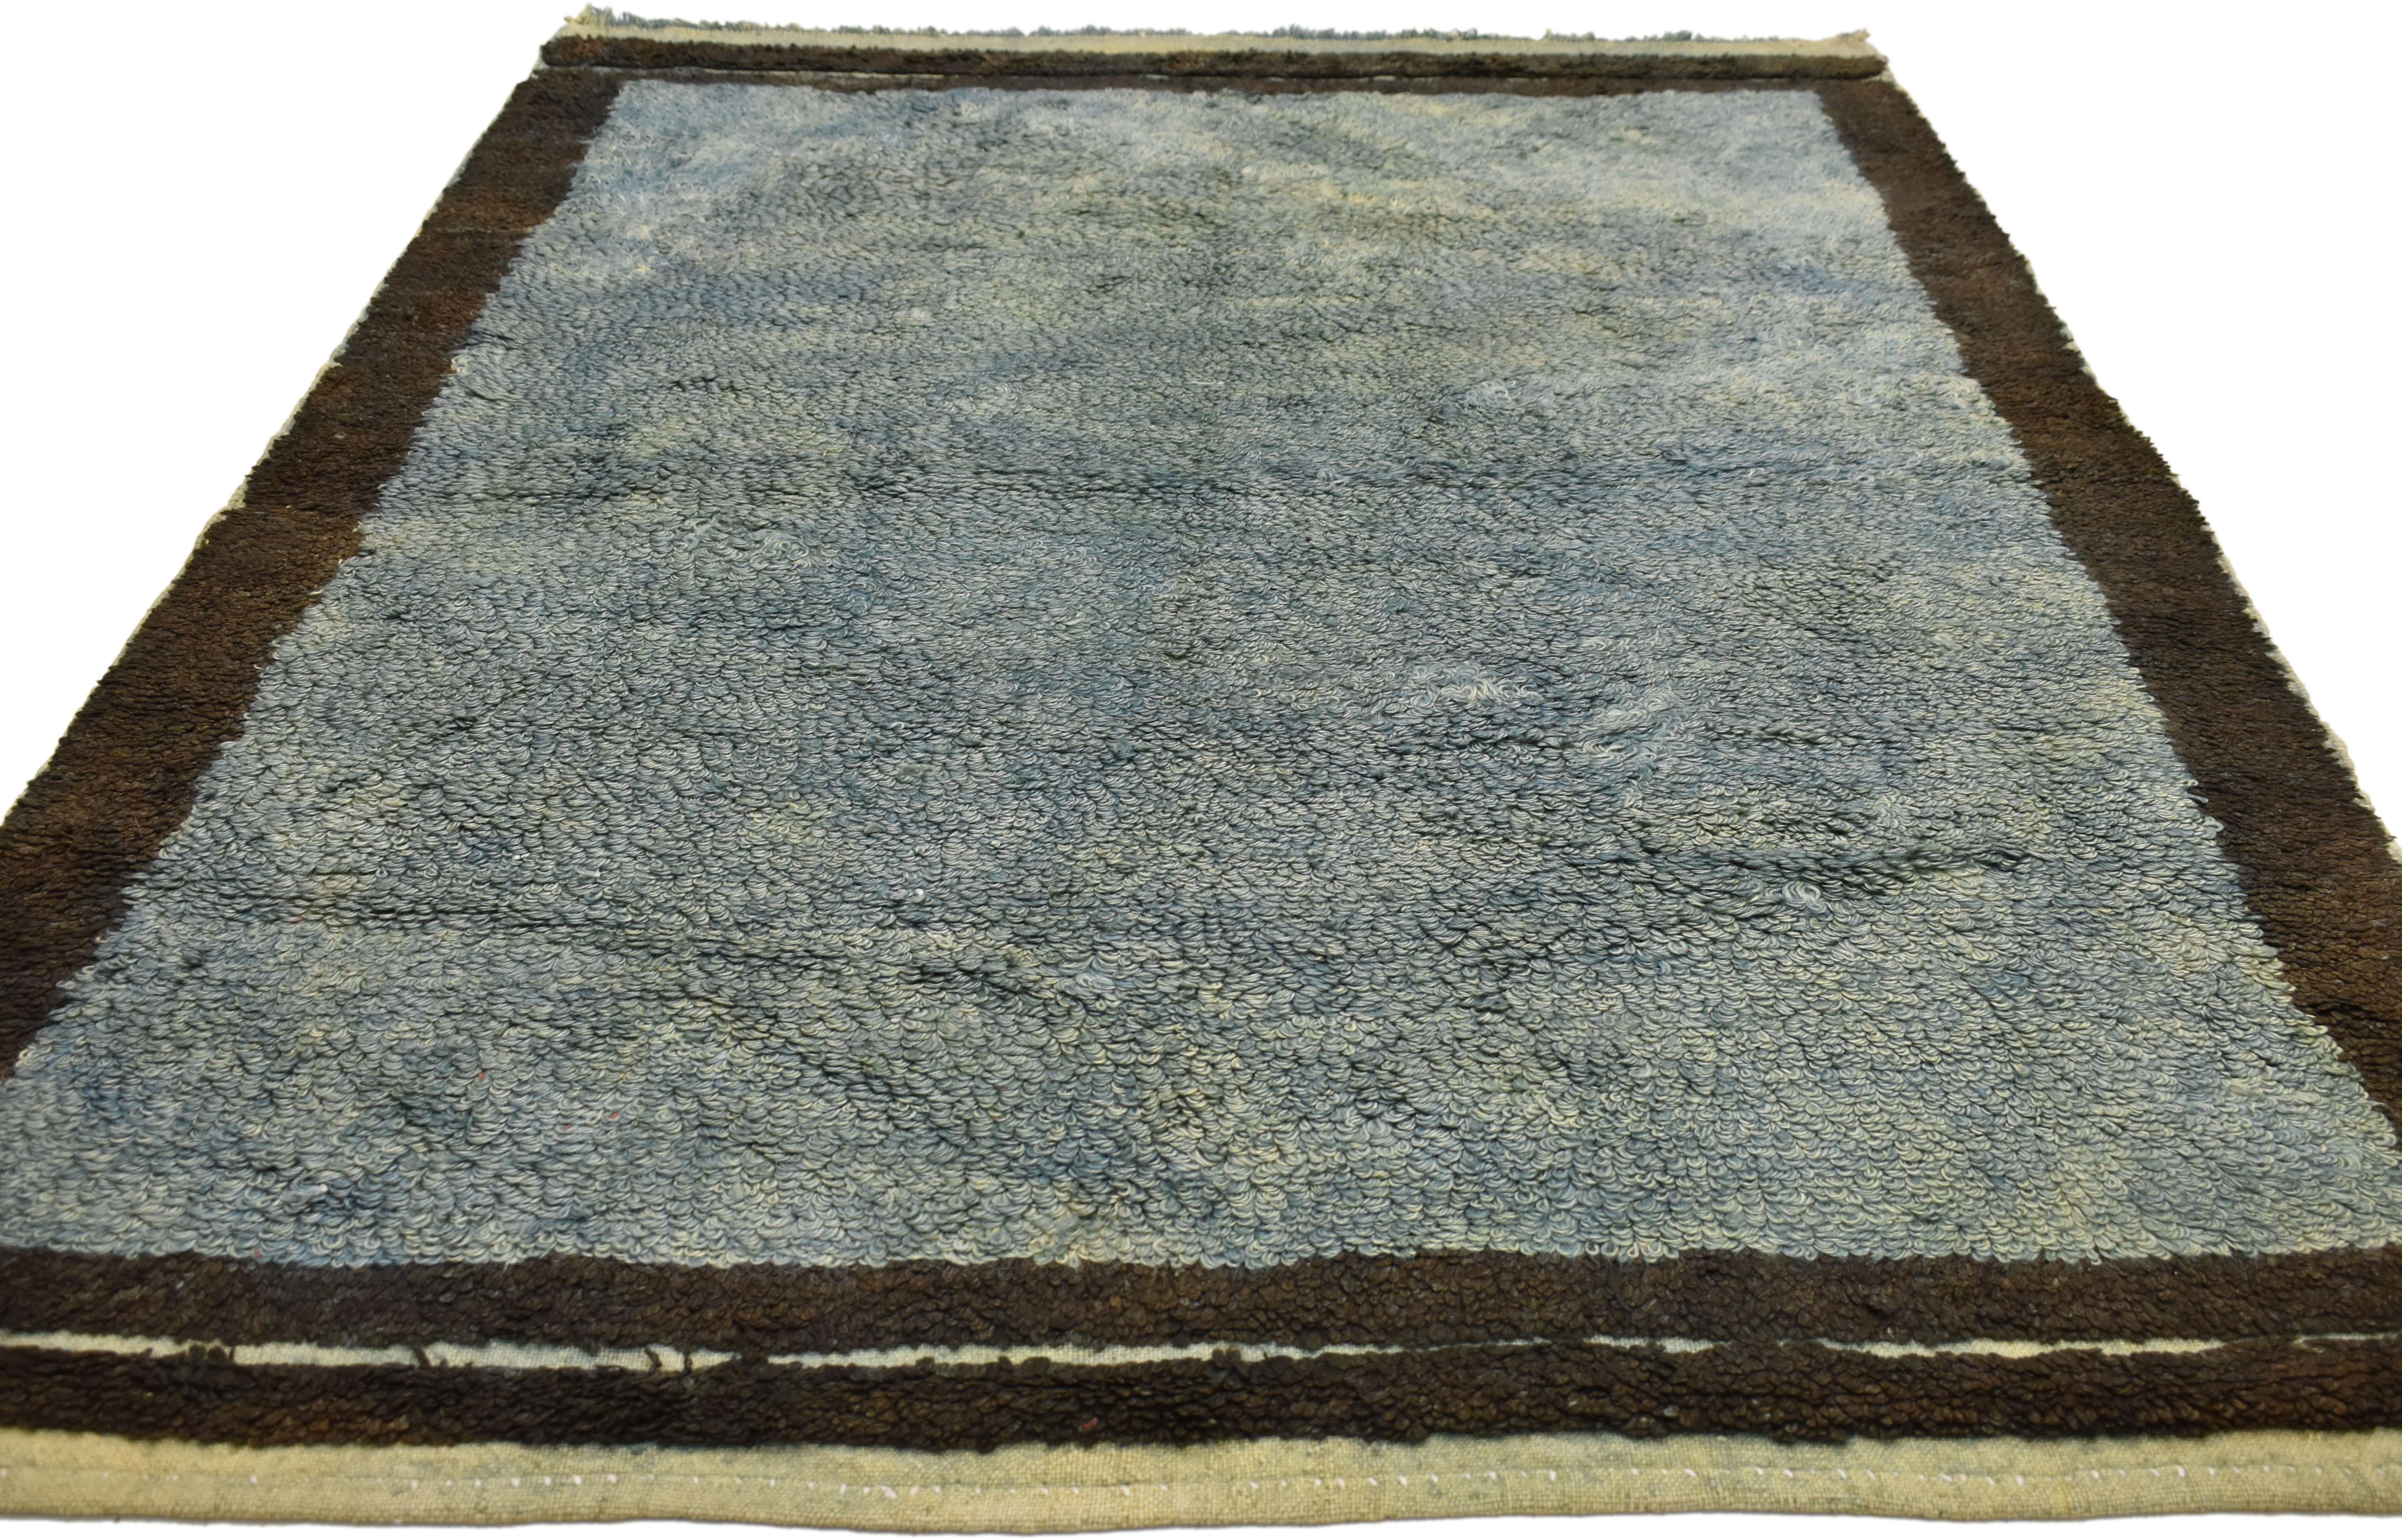 73982 Vintage Turkish Shag Rug with Mid-Century Modern Style. This hand knotted wool vintage Turkish rug features a solid plane of angora wool rendered in variegated shades of turquoise, ocean, teal and cerulean blue with celadon and verdigris